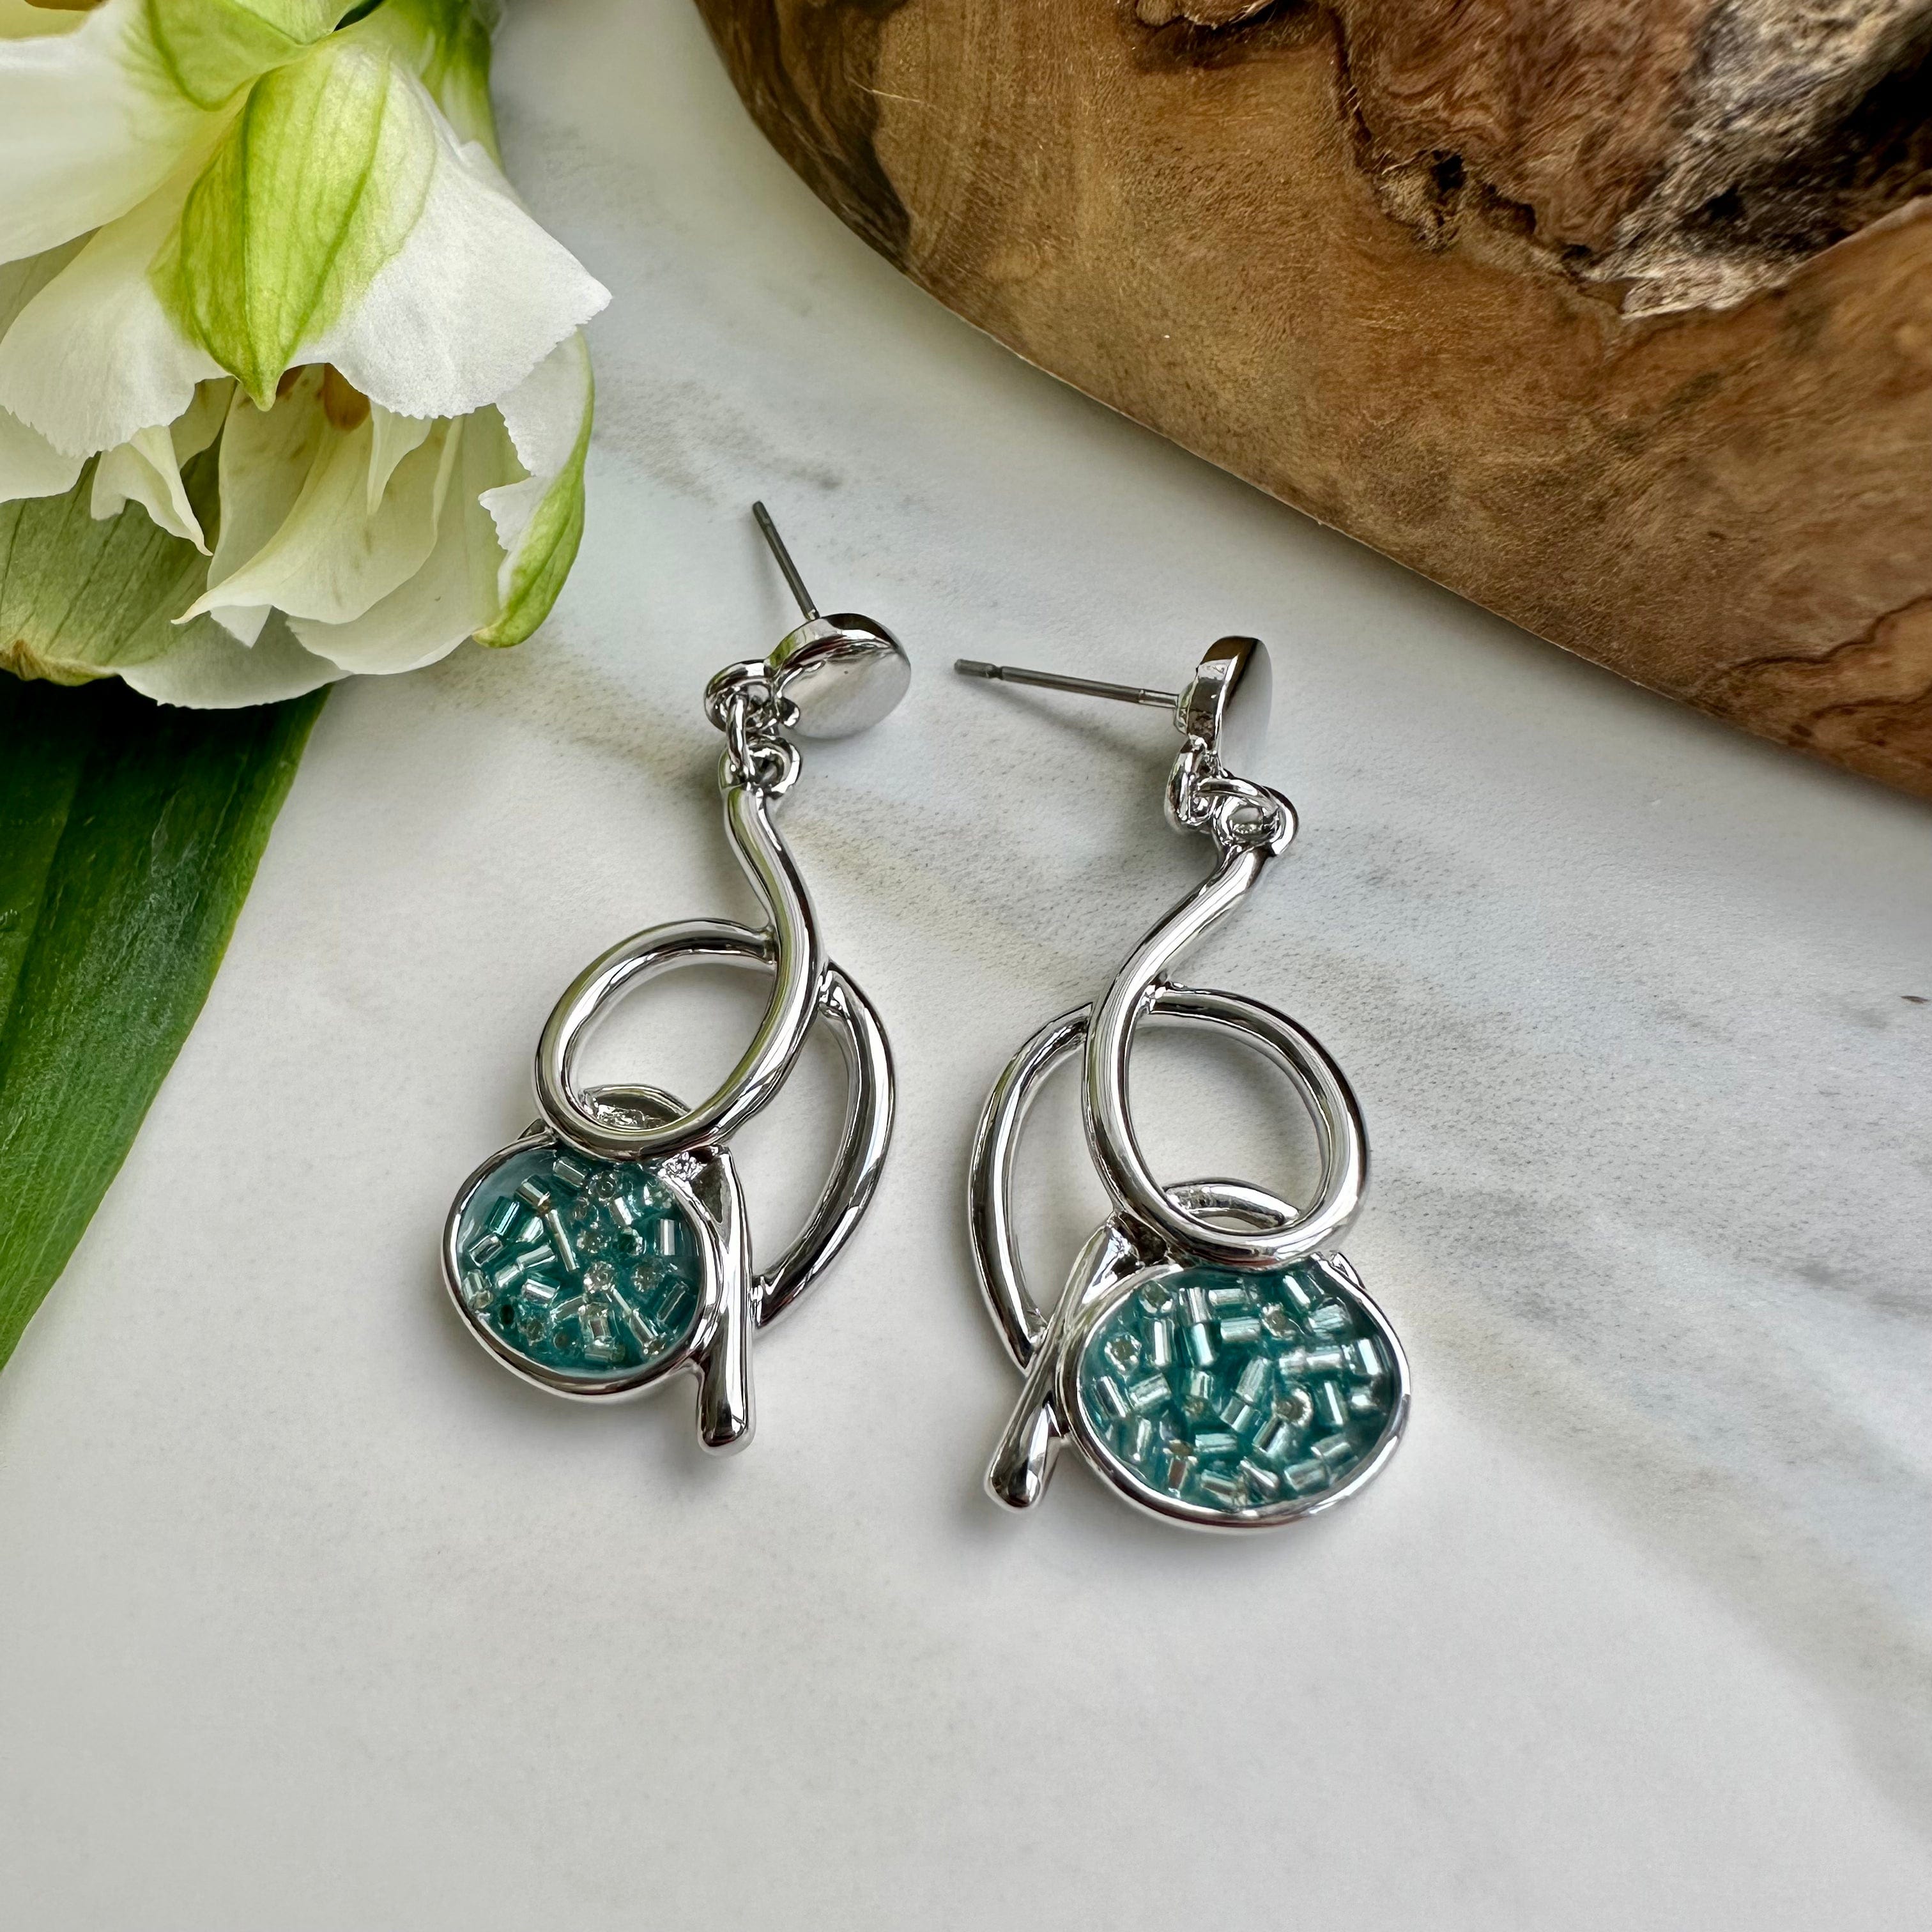 lusciousscarves Miss Milly Aqua Textured Swirl Earrings FE595